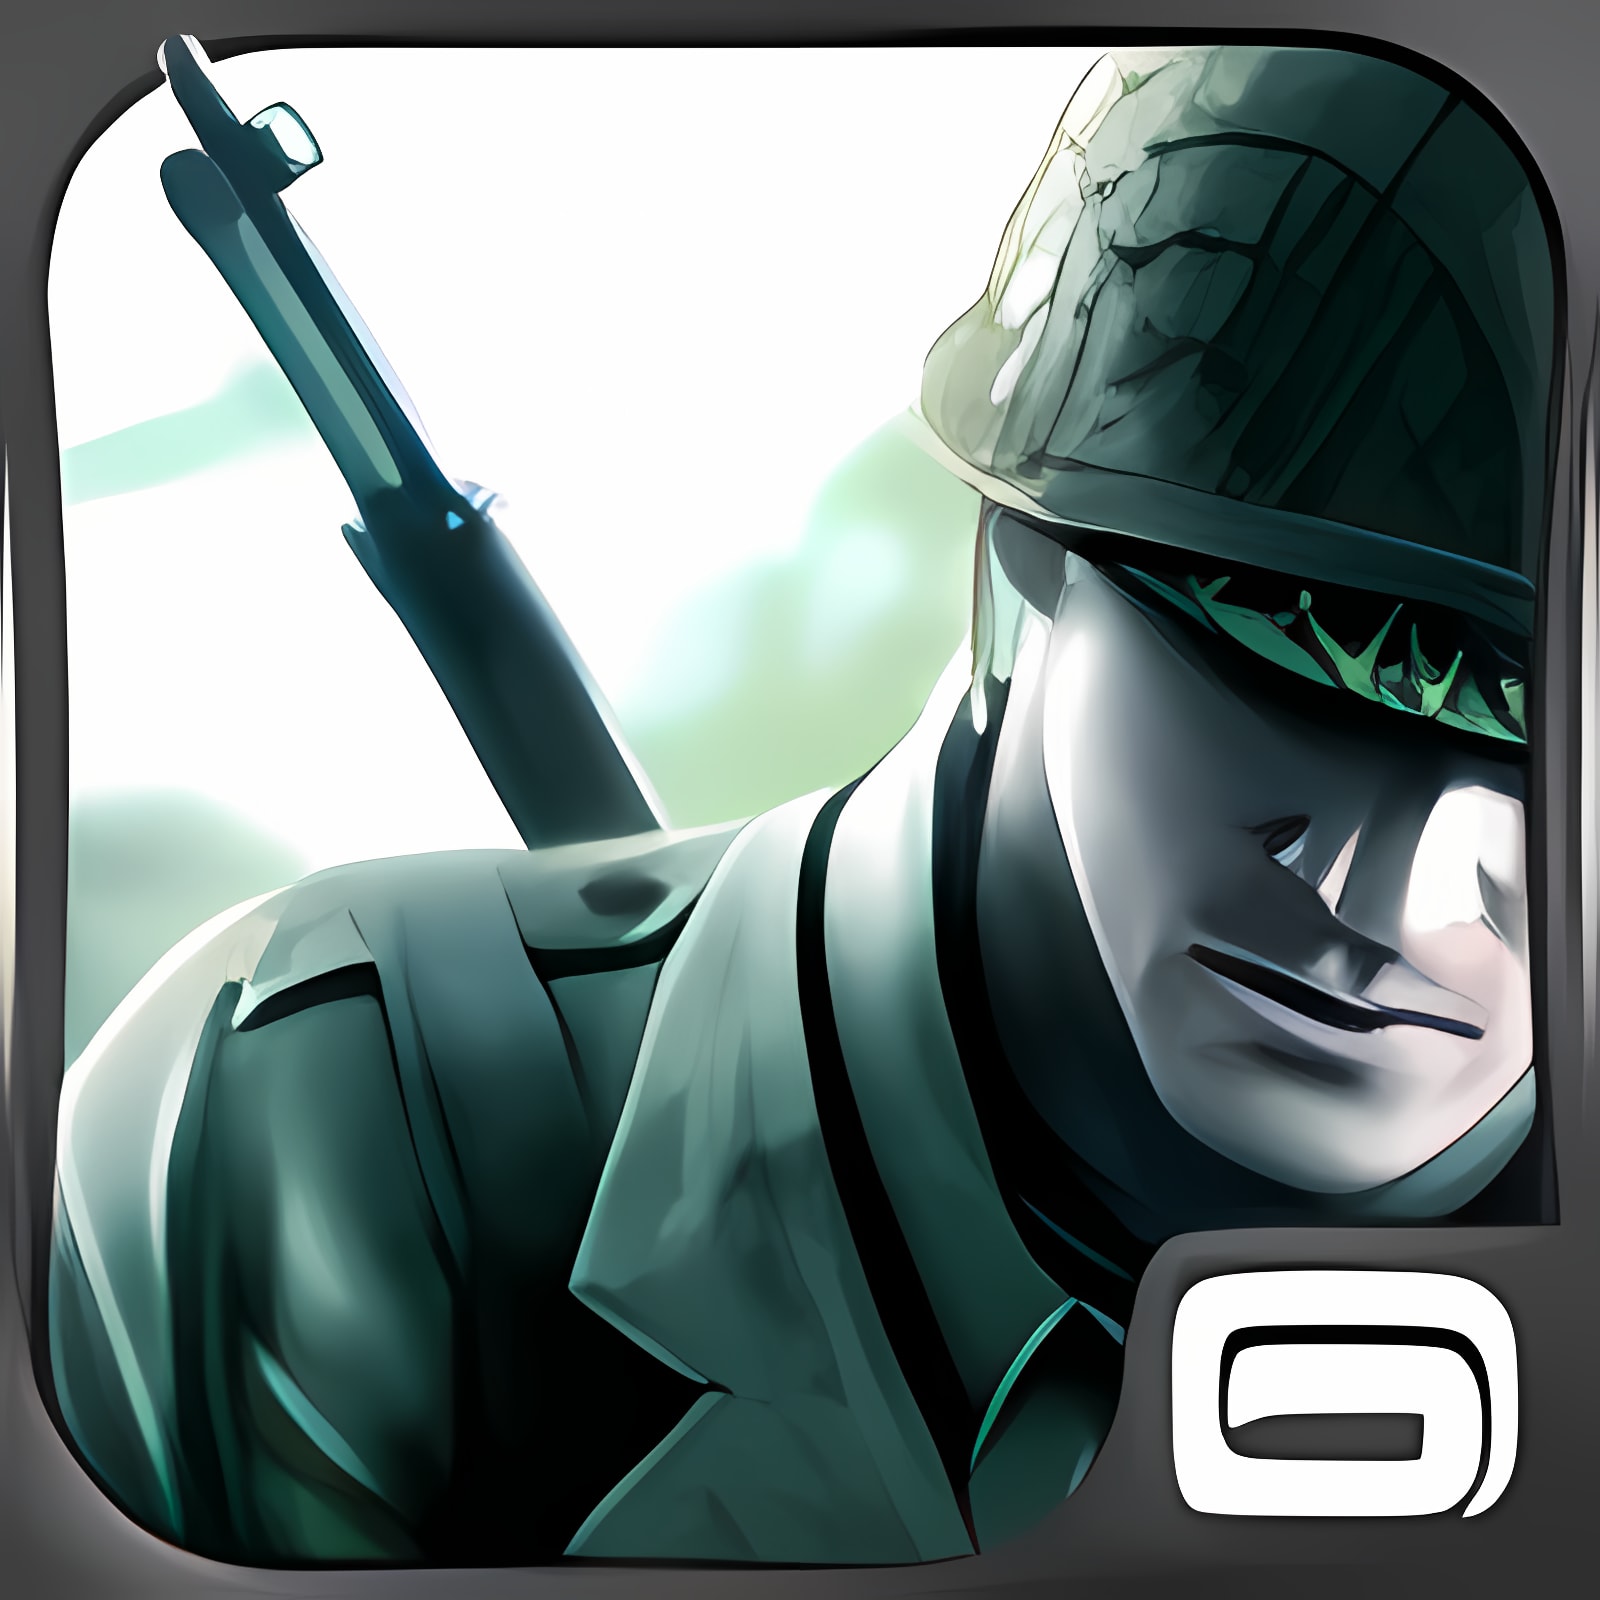 download brothers in arms 2 global front hd for free